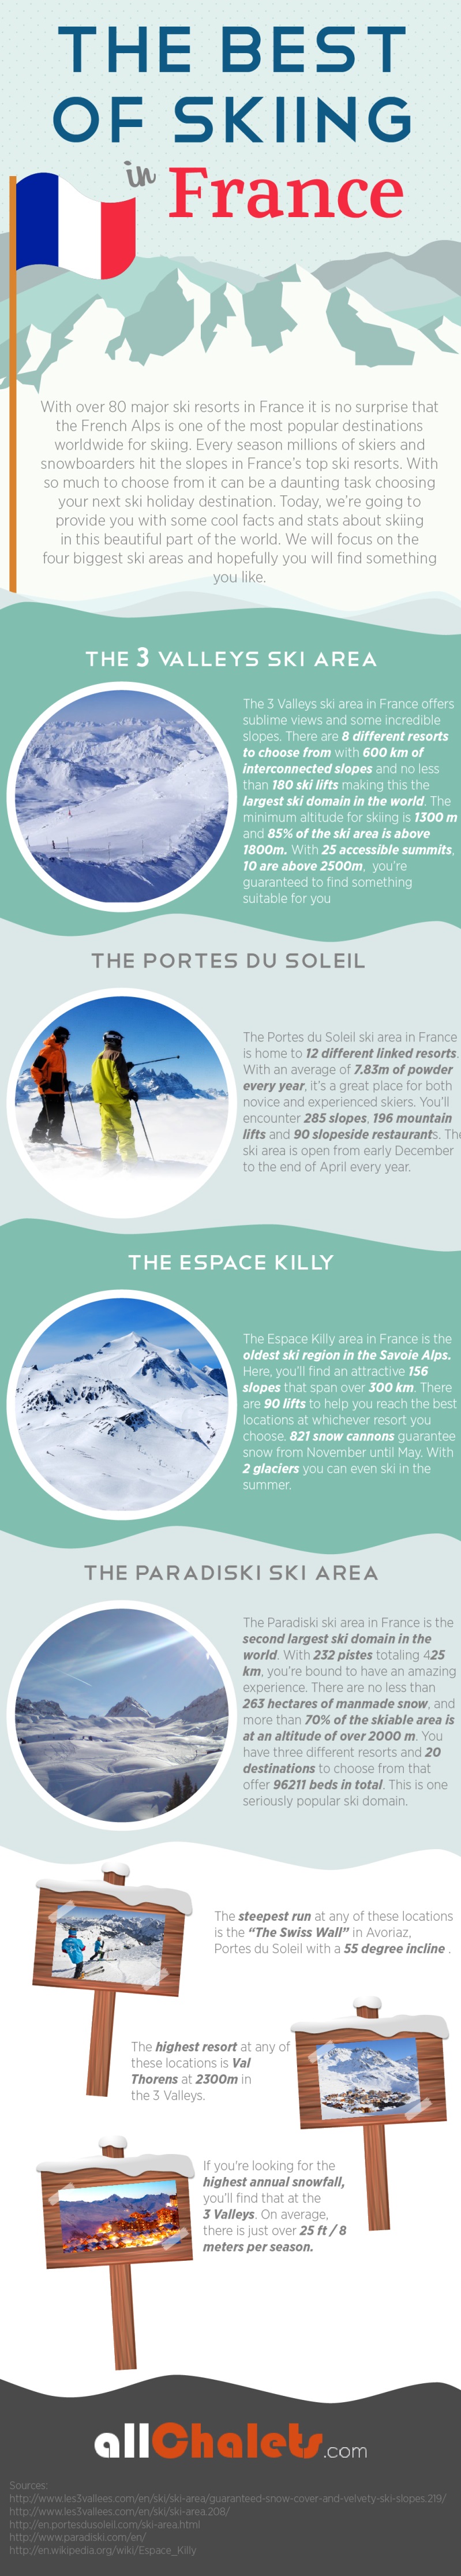 Skiing in France Infographic